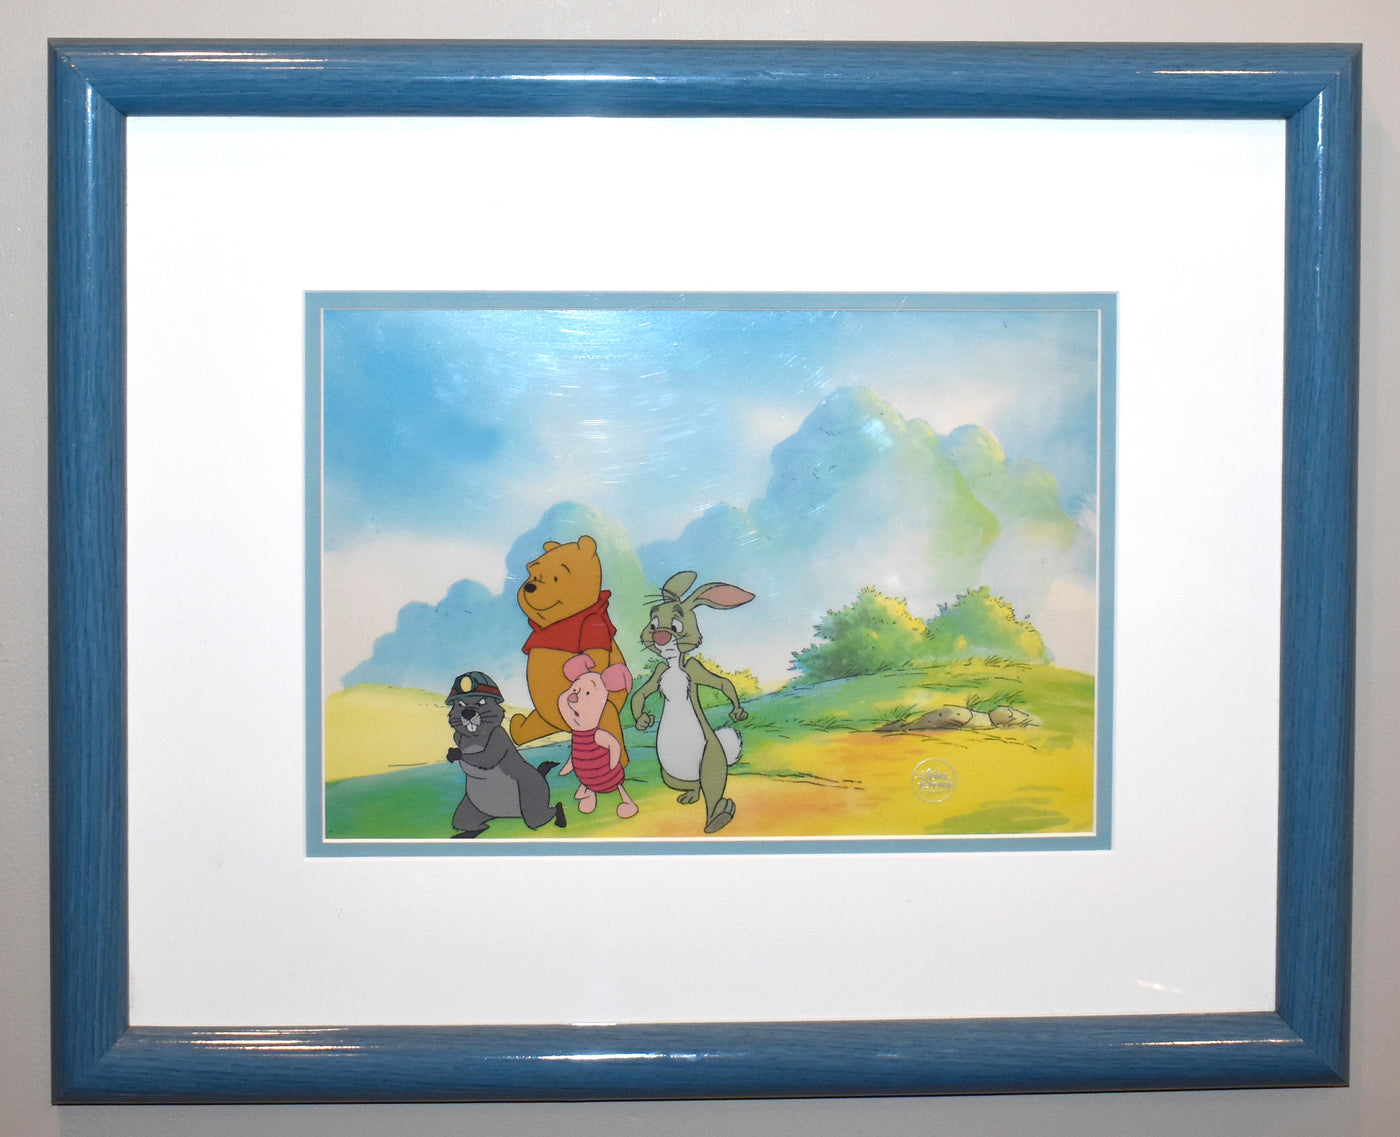 Original Walt Disney Television Production Cel from The New Adventures of Winnie the Pooh featuring Gopher, Piglet, Winnie the Pooh and Rabbit